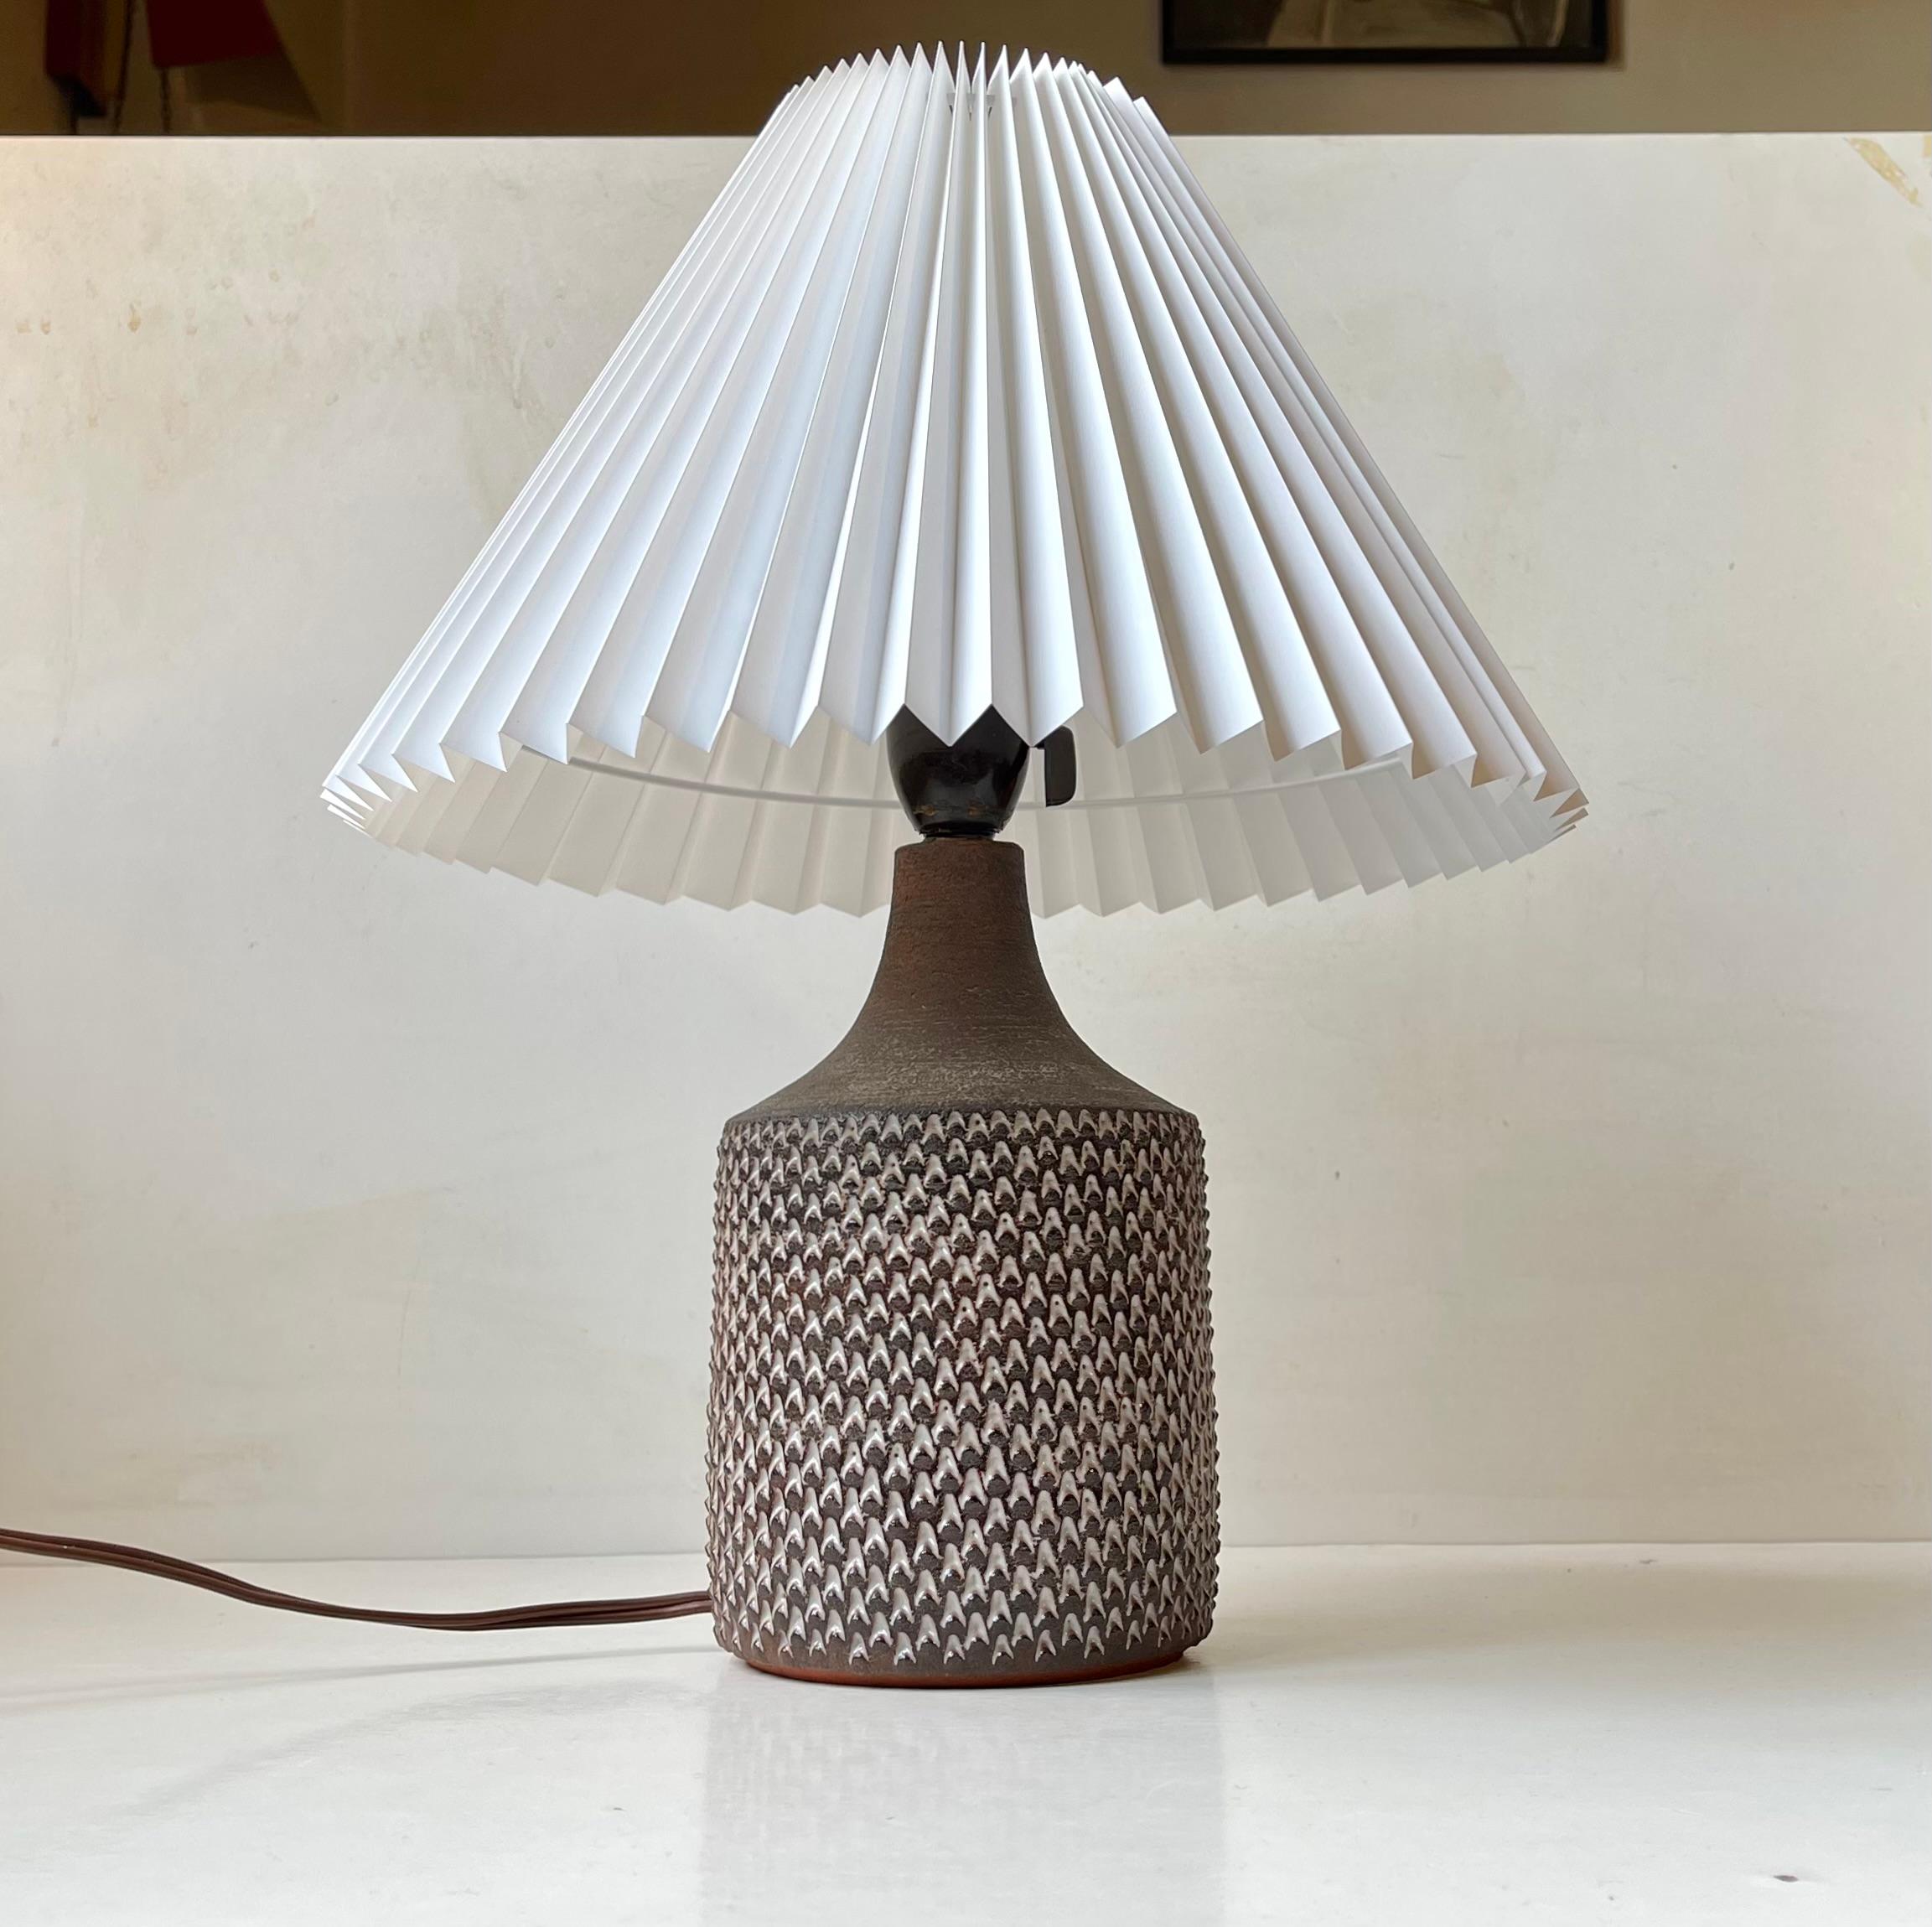 Danish Modern Jytte Trebbien Ceramic Table Lamp in 'Budded' Style for Tusbo In Good Condition For Sale In Esbjerg, DK